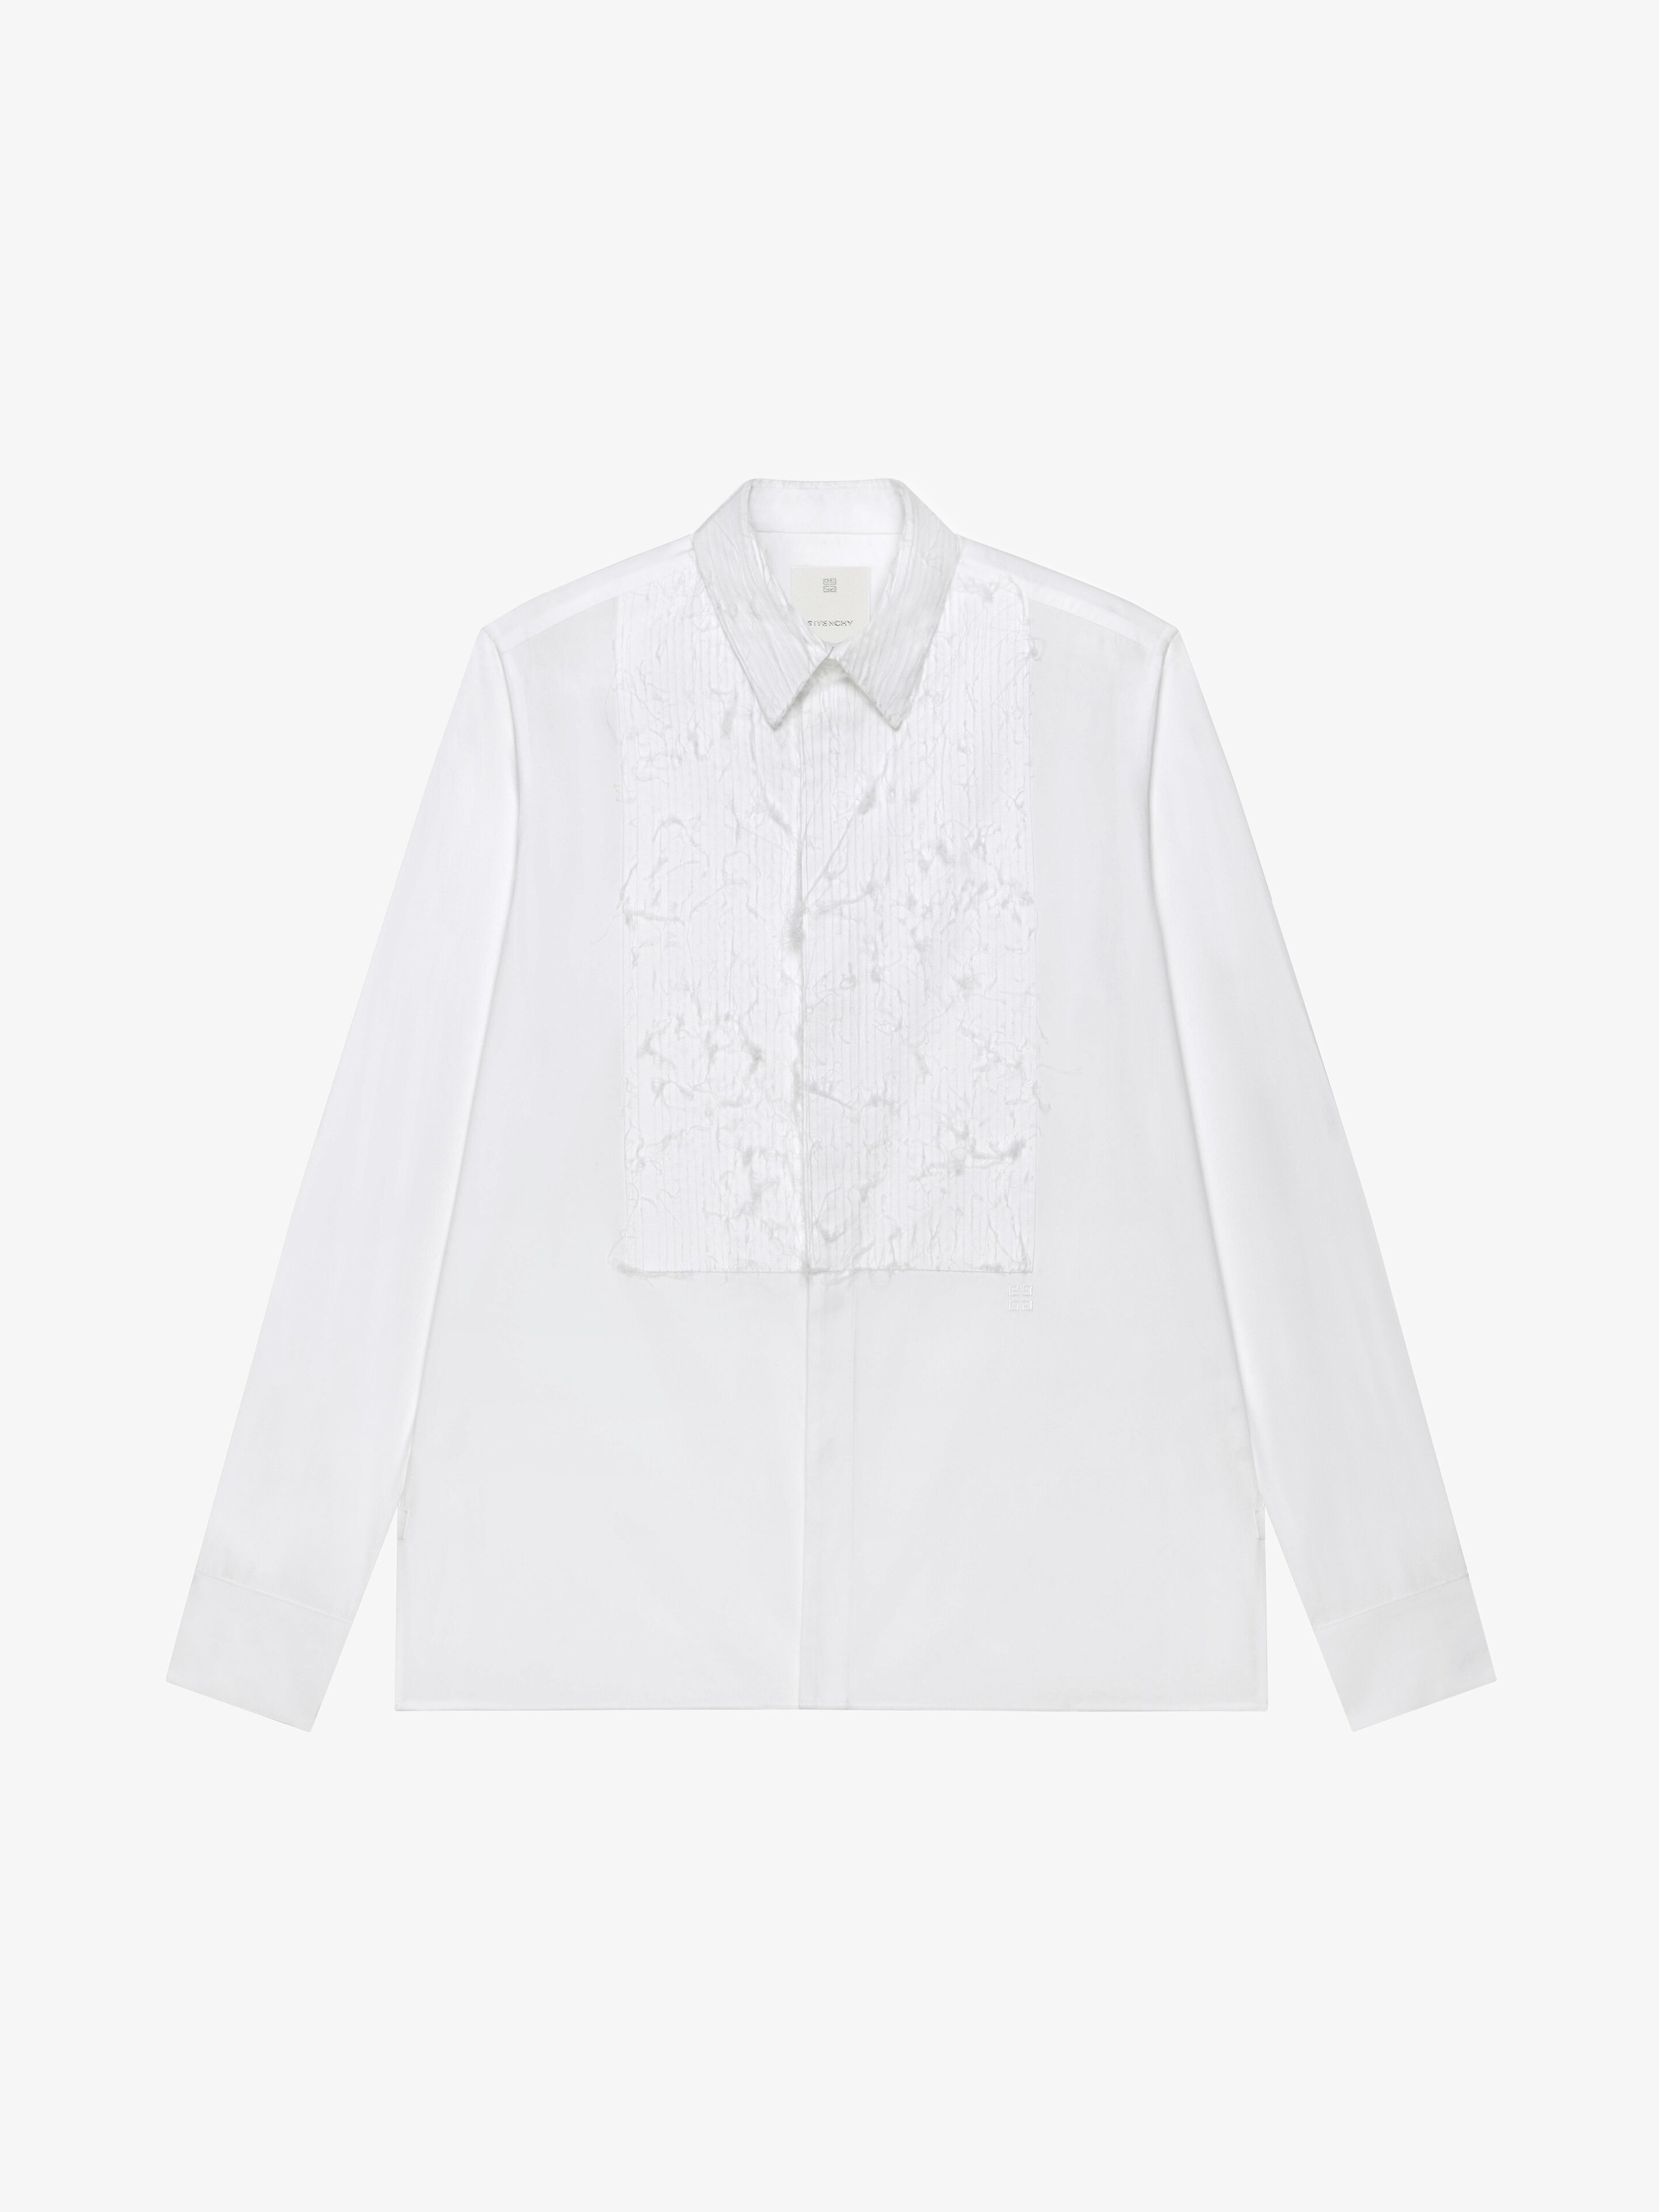 Givenchy Shirt In Cotton With Textured Bib Front In White